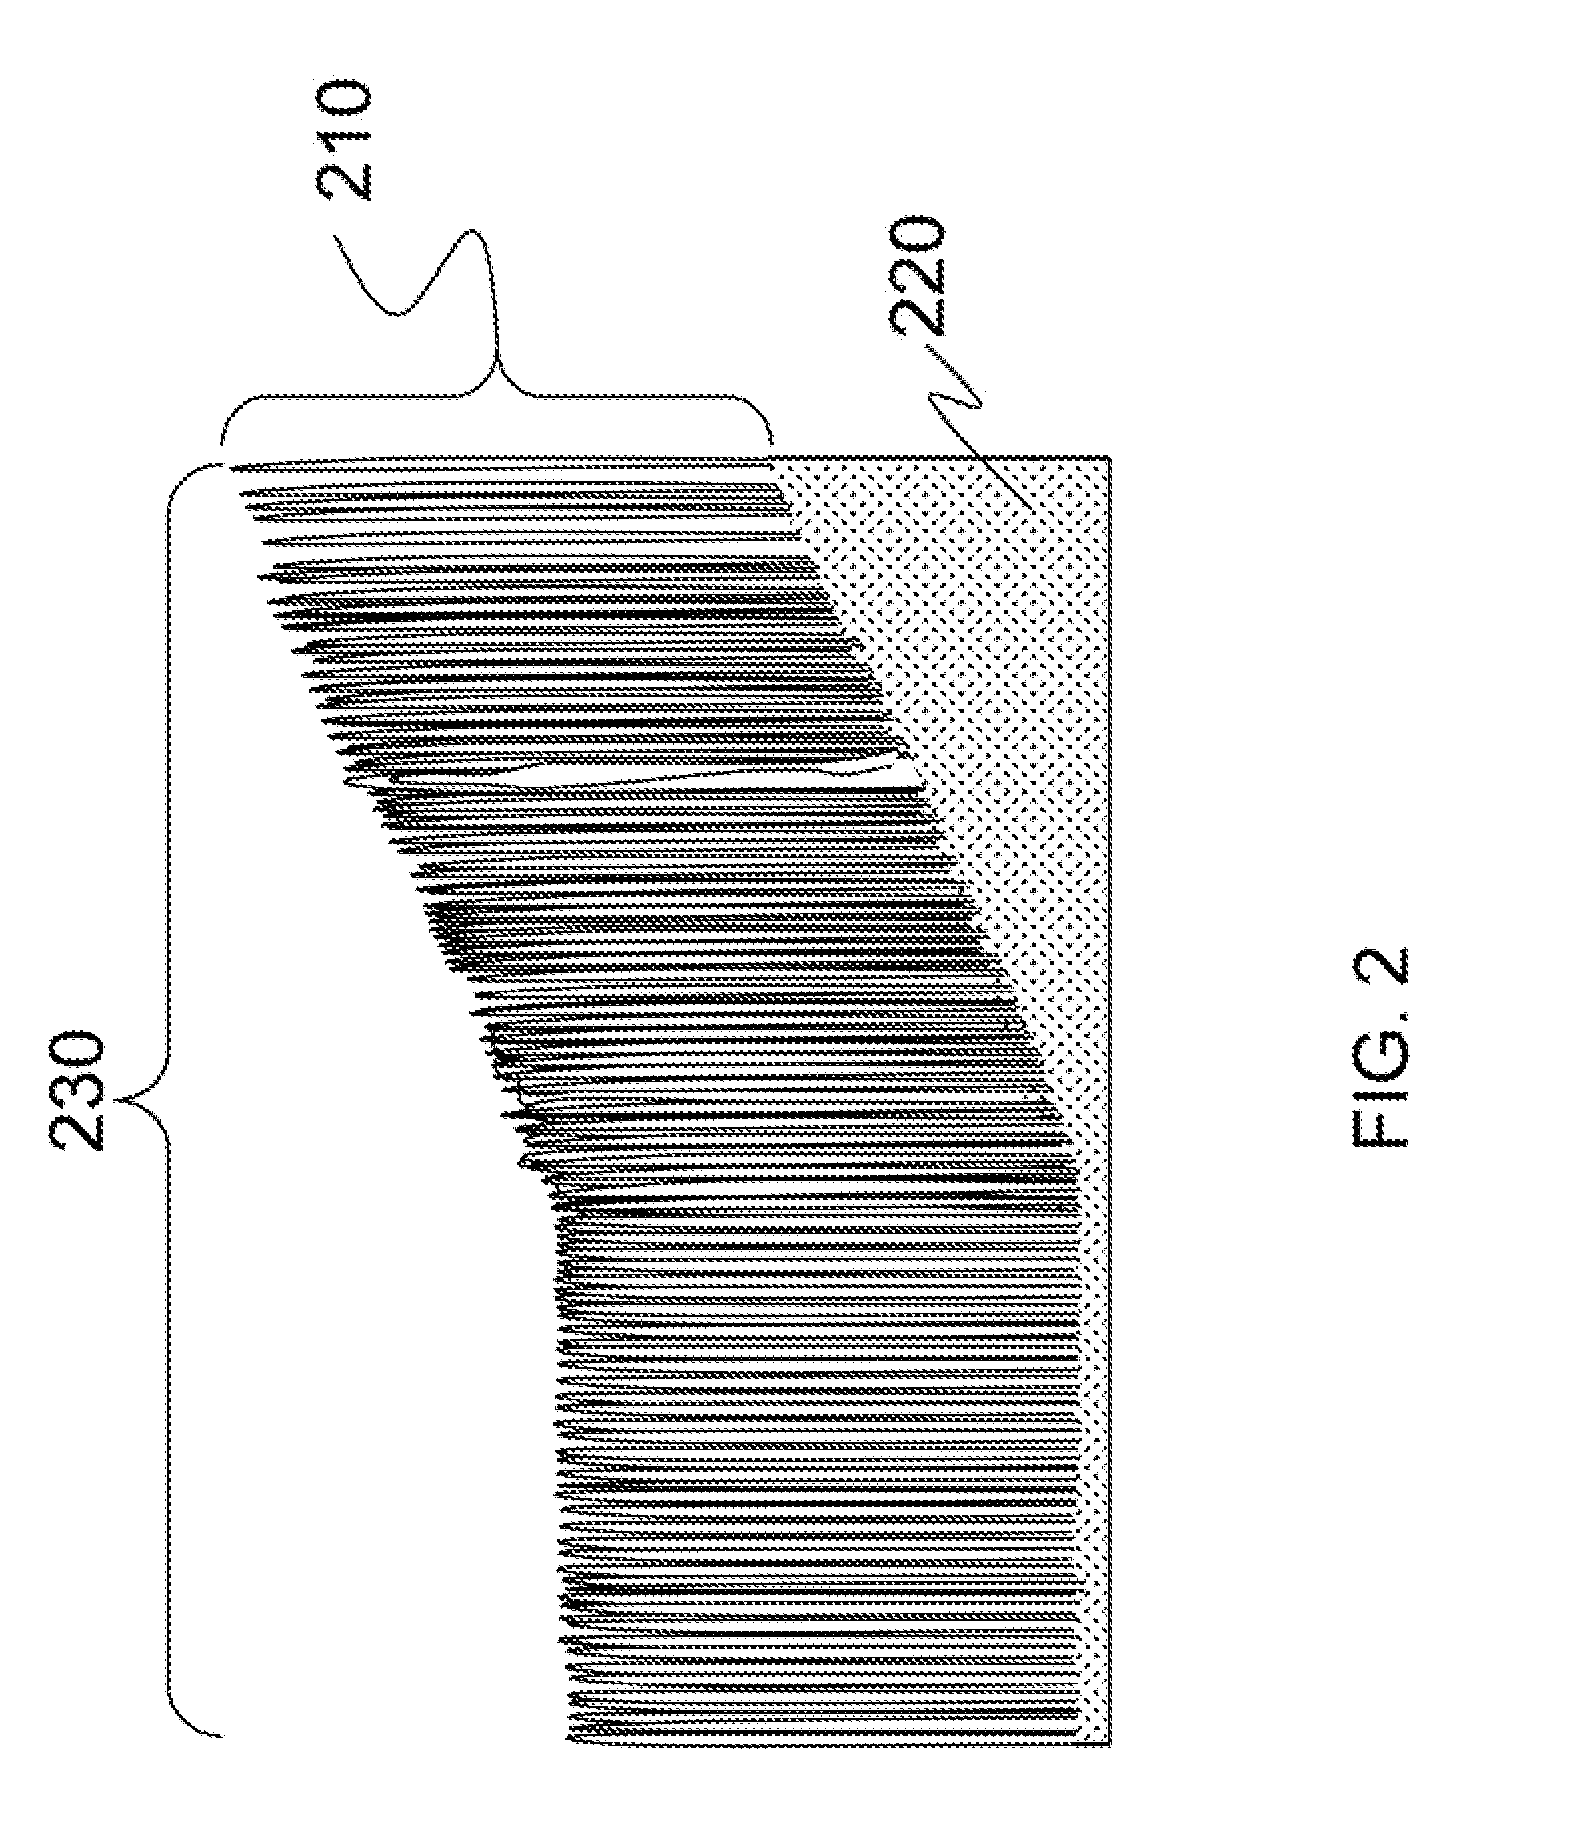 Method for selectively anchoring and exposing large numbers of nanoscale structures